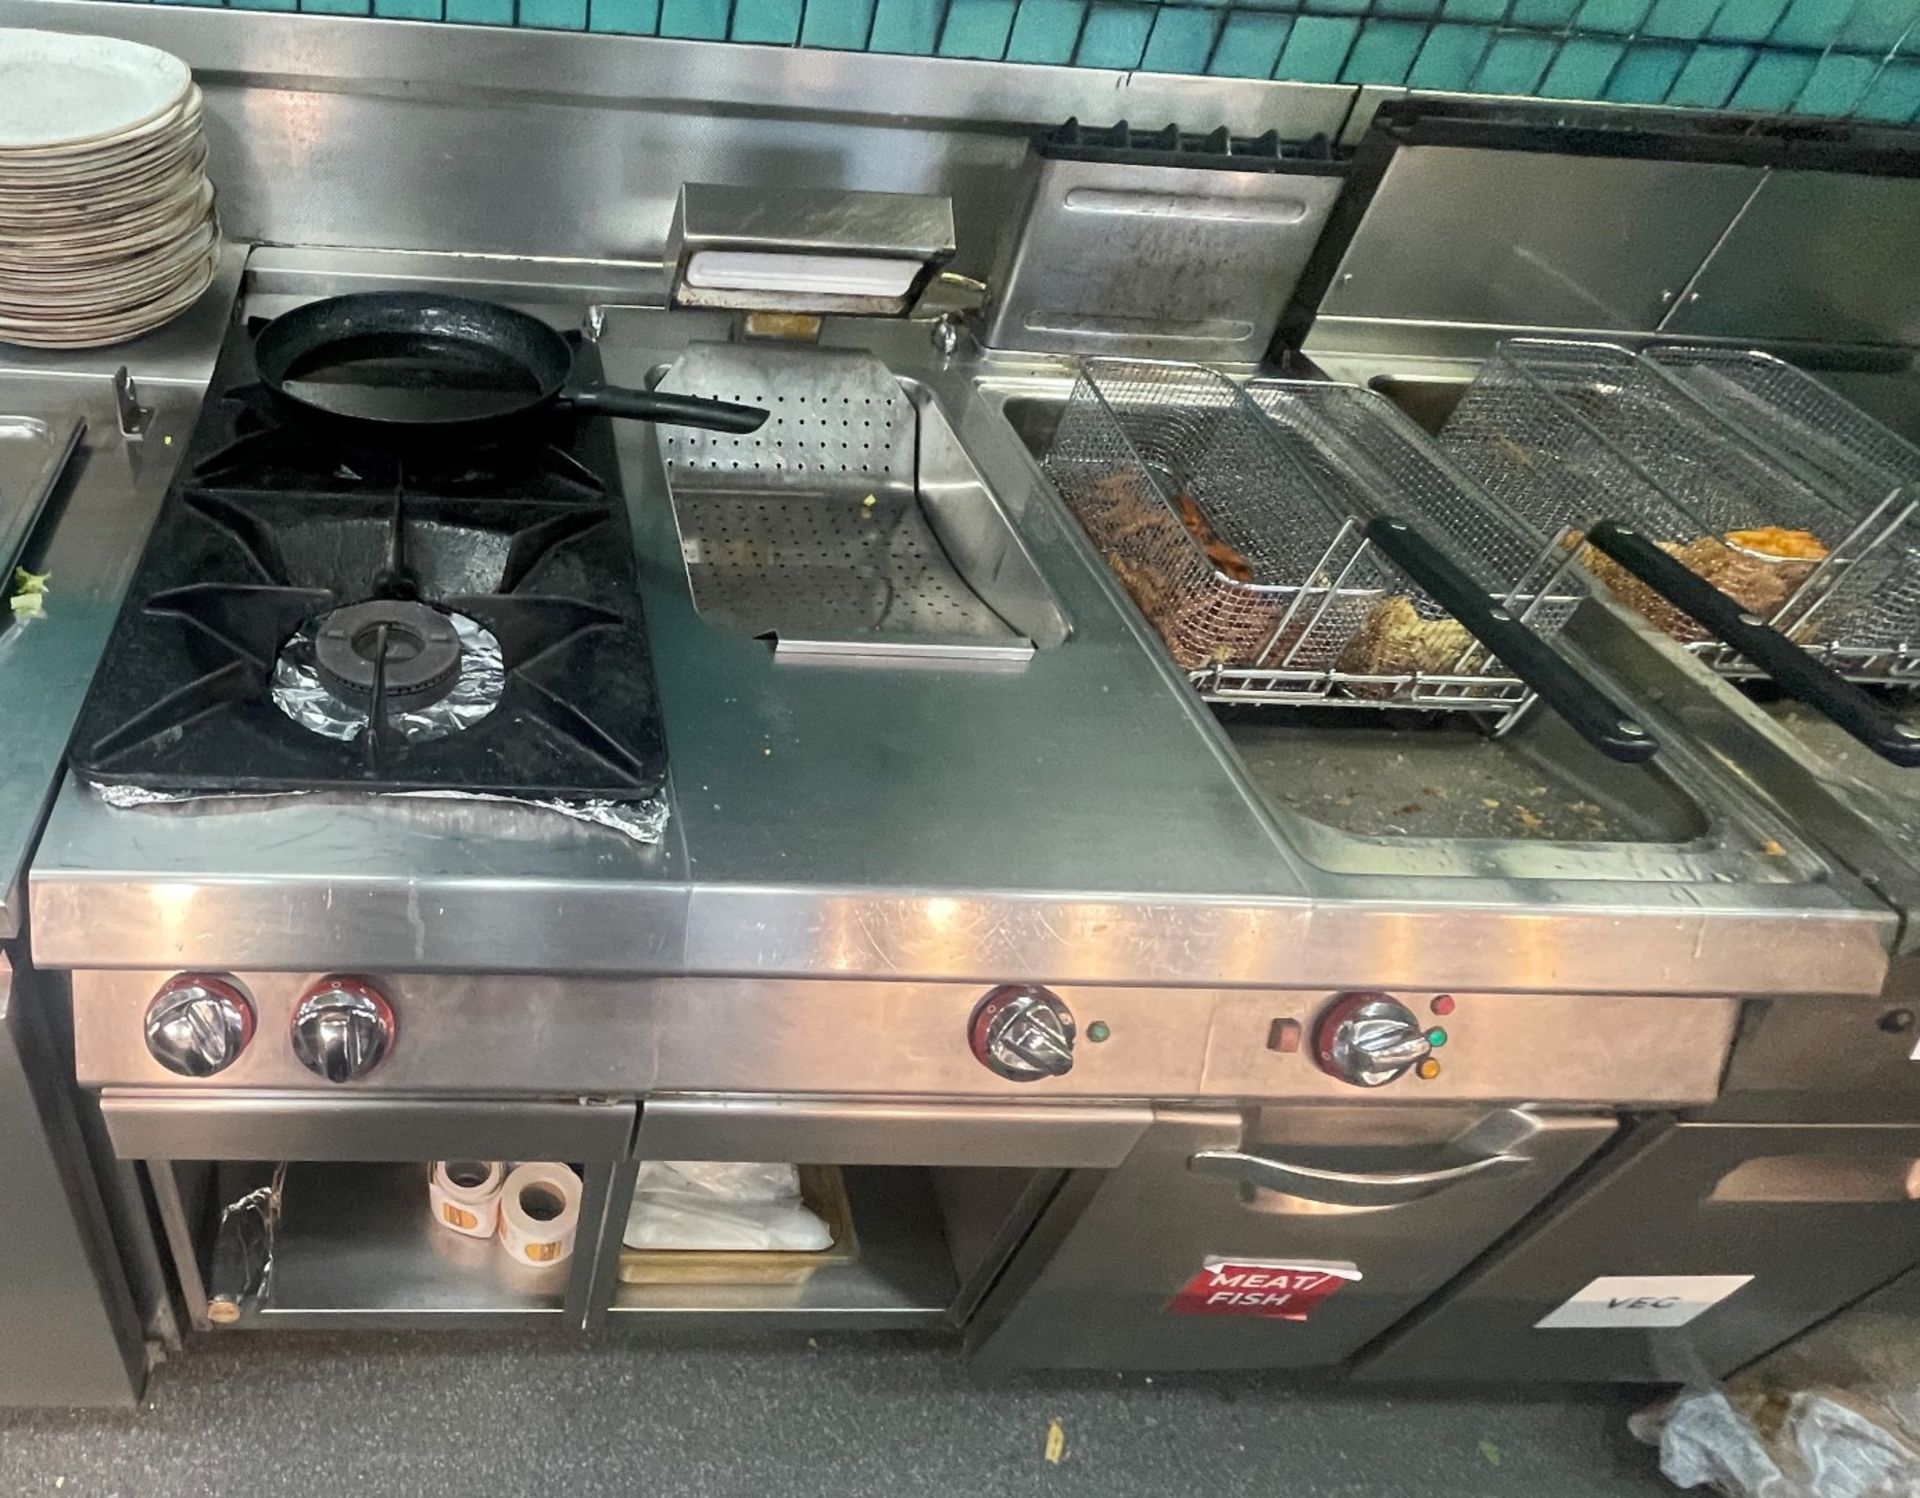 1 x Angelo Po Cook Station Featuring Single Tank Fryer, Two Burner Cooker and Chip Scuttle - Image 7 of 8